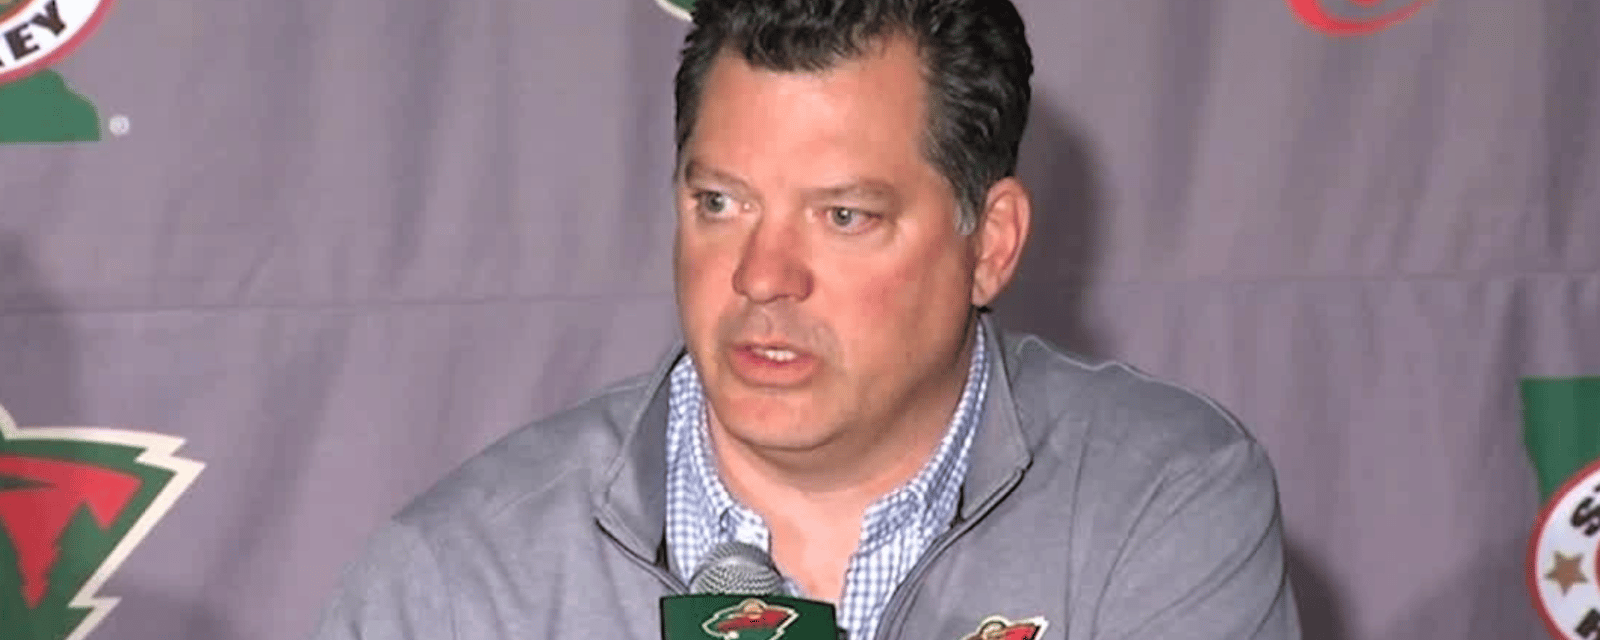 Minnesota Wild announce new contract signing 